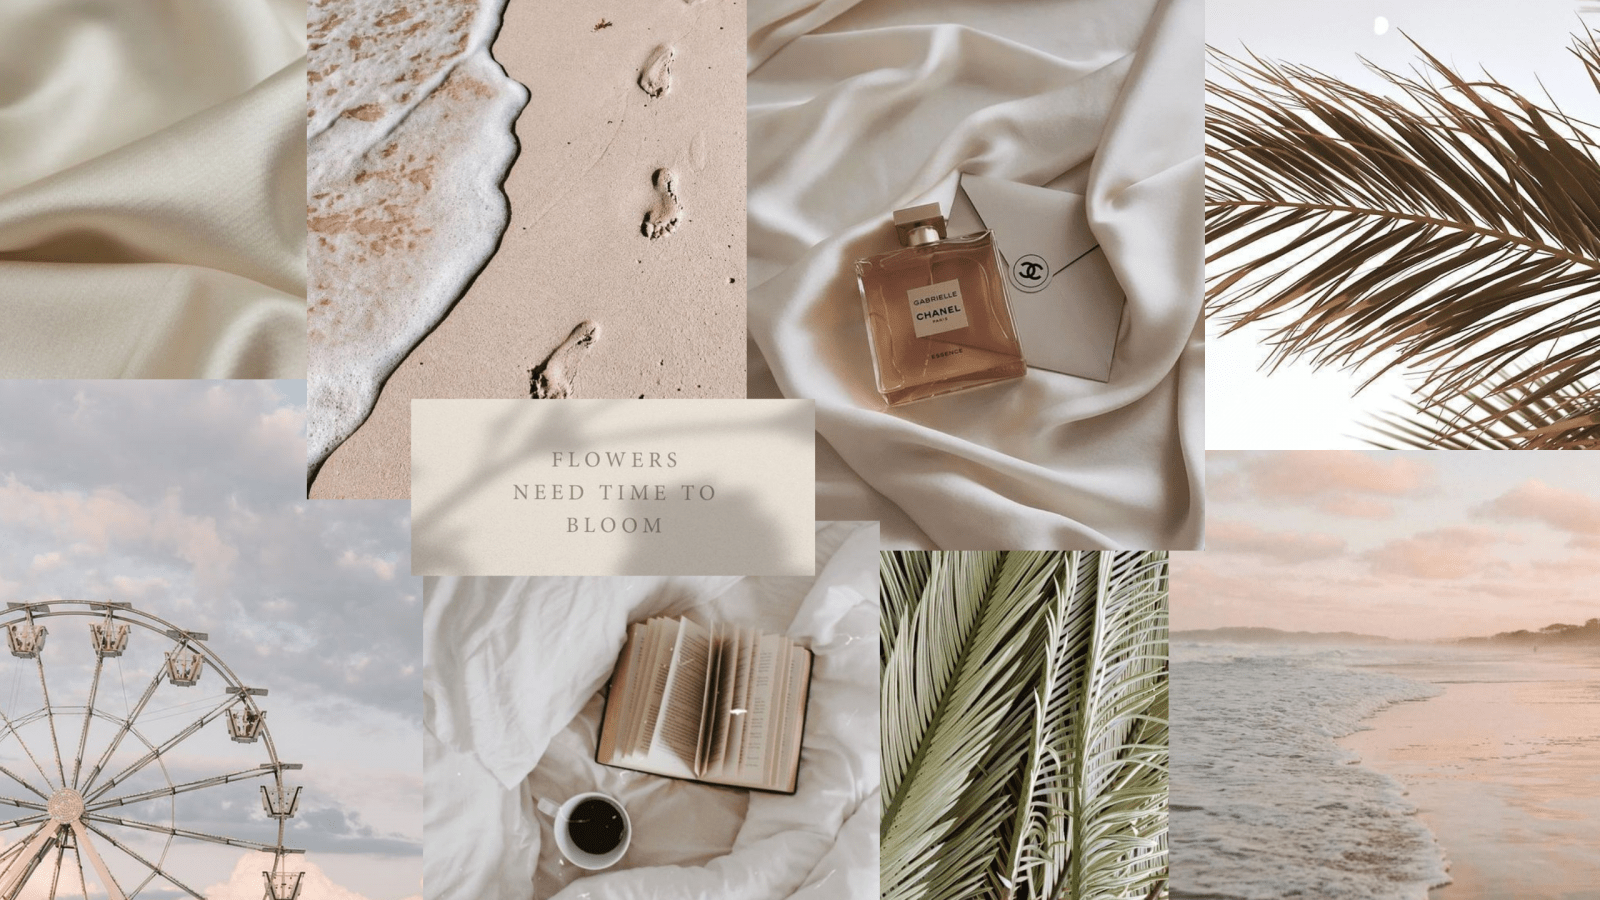 A collage of images including a ferris wheel, palm leaves, a bottle of Chanel perfume, and a book. - Minimalist beige, beige